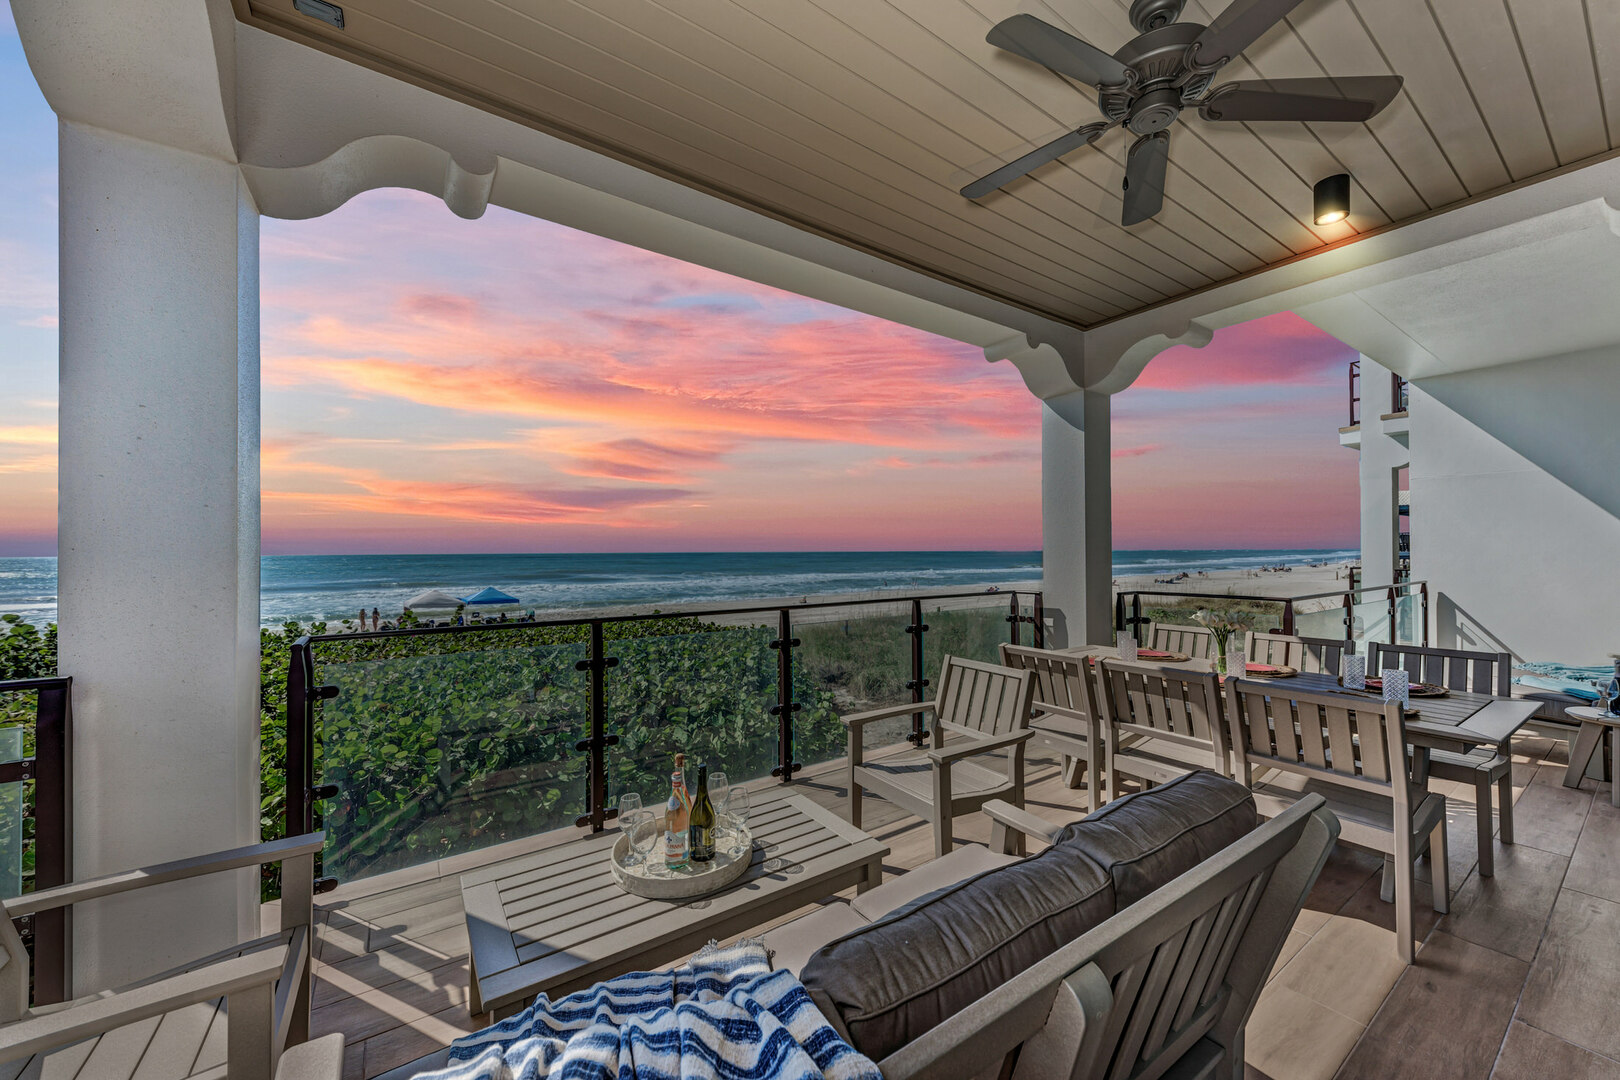 View of the Gulf of Mexico at sunset from Buena Vista #2 by Anna Maria Life Vacation Rentals